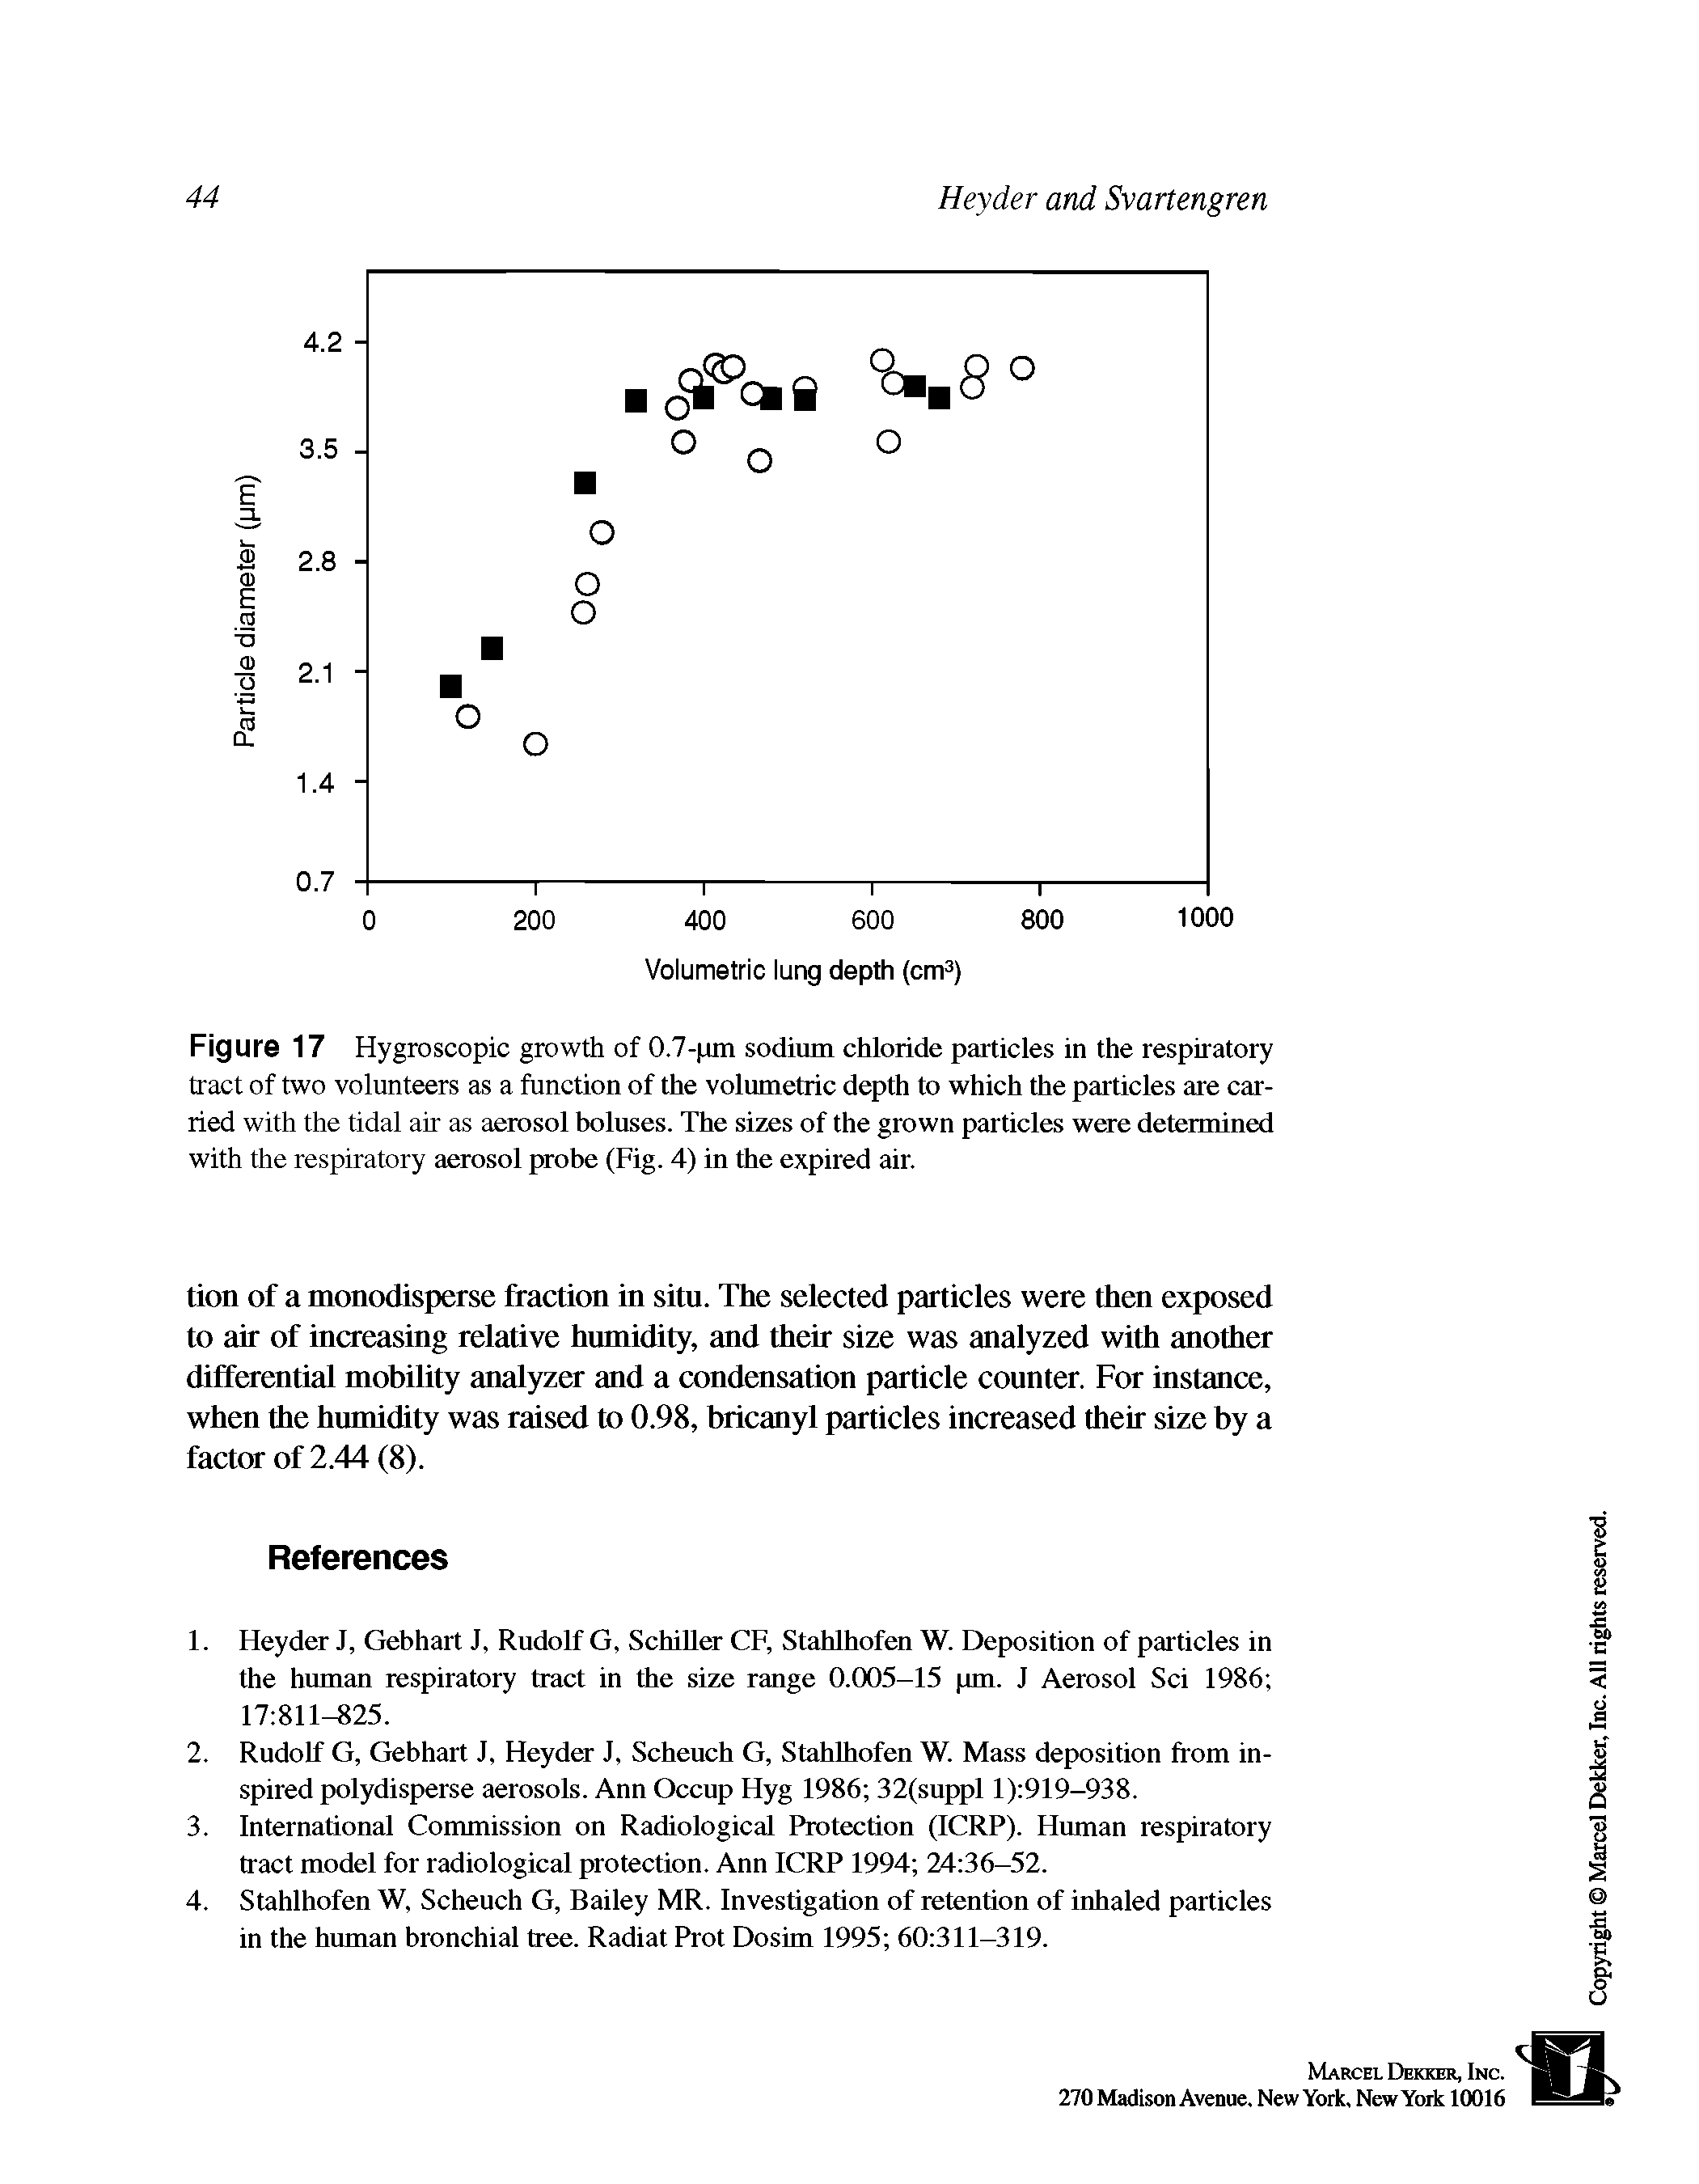 Figure 17 Hygroscopic growth of 0.7-pm sodium chloride particles in the respiratory tract of two volunteers as a function of the volnmetric depth to which the particles are carried with the tidal air as aerosol boluses. The sizes of the grown particles were determined with the respiratory aerosol probe (Fig. 4) in the expired air.